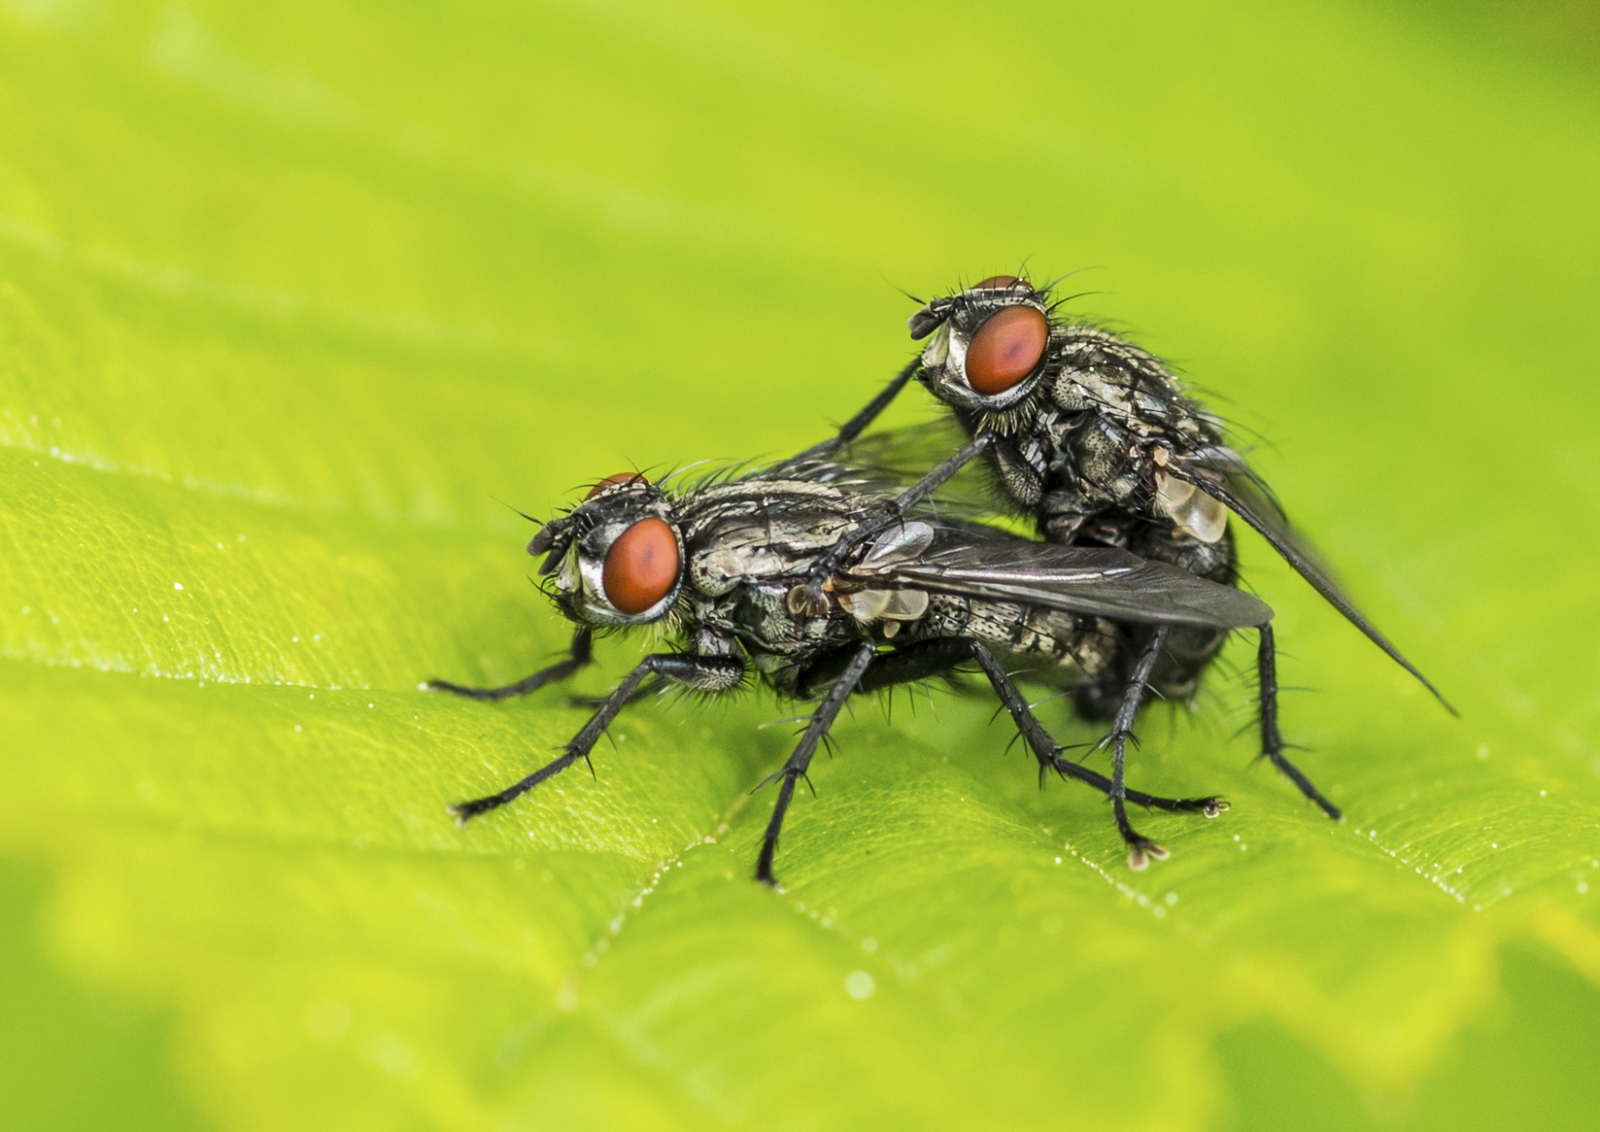 Sex And Ejaculation Controlled Separately In Fly Brains Suggesting Pleasure In Copulation